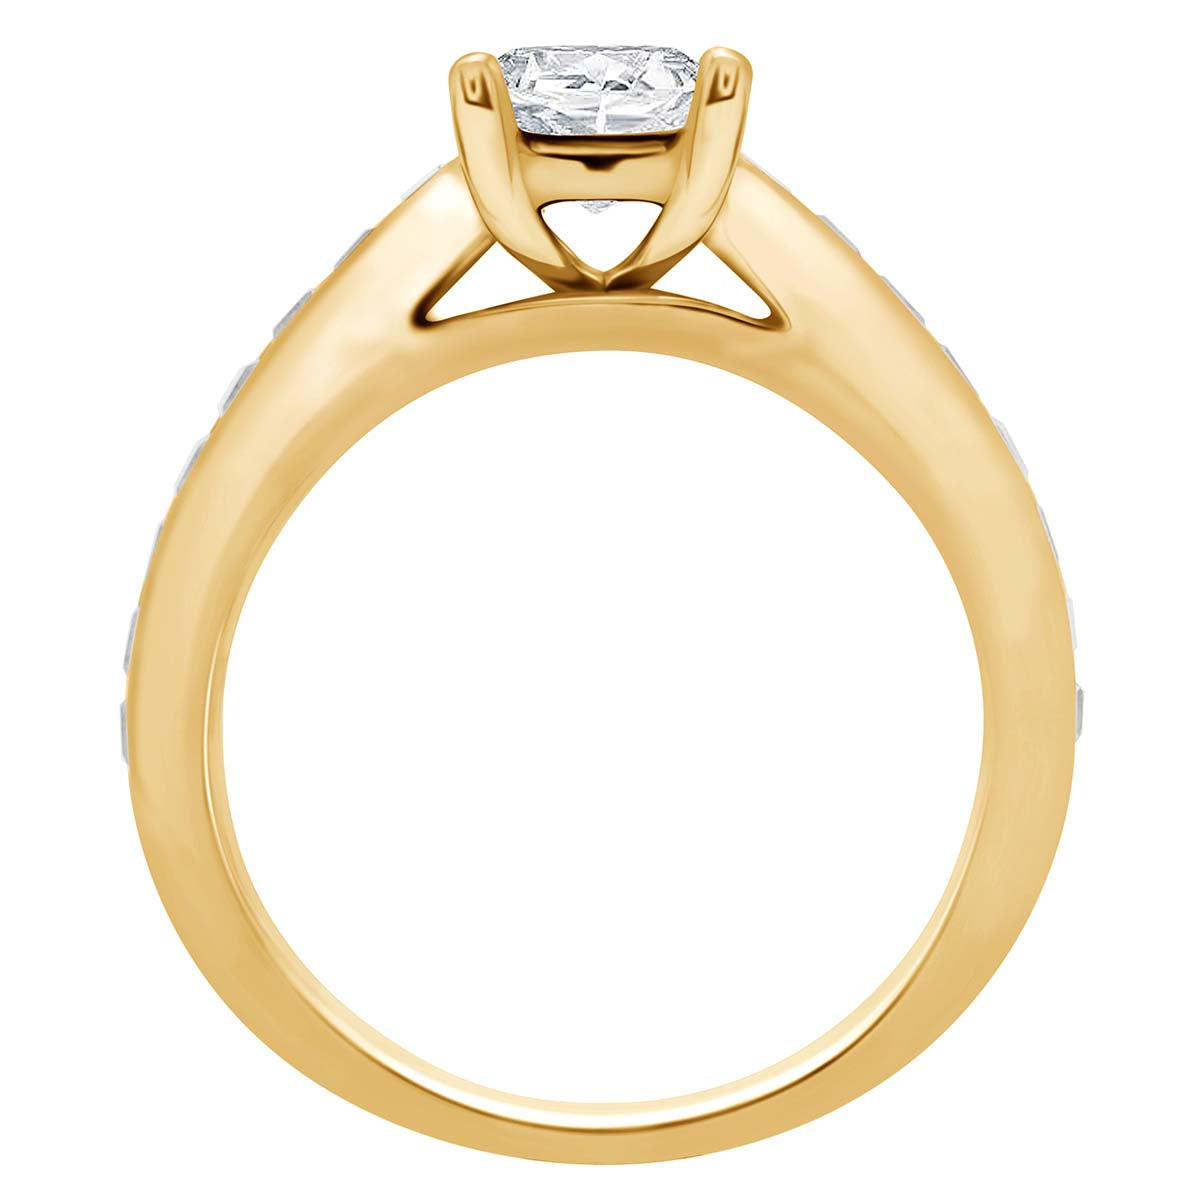 Princess Shape Diamond Ring made from yellow gold standing upright